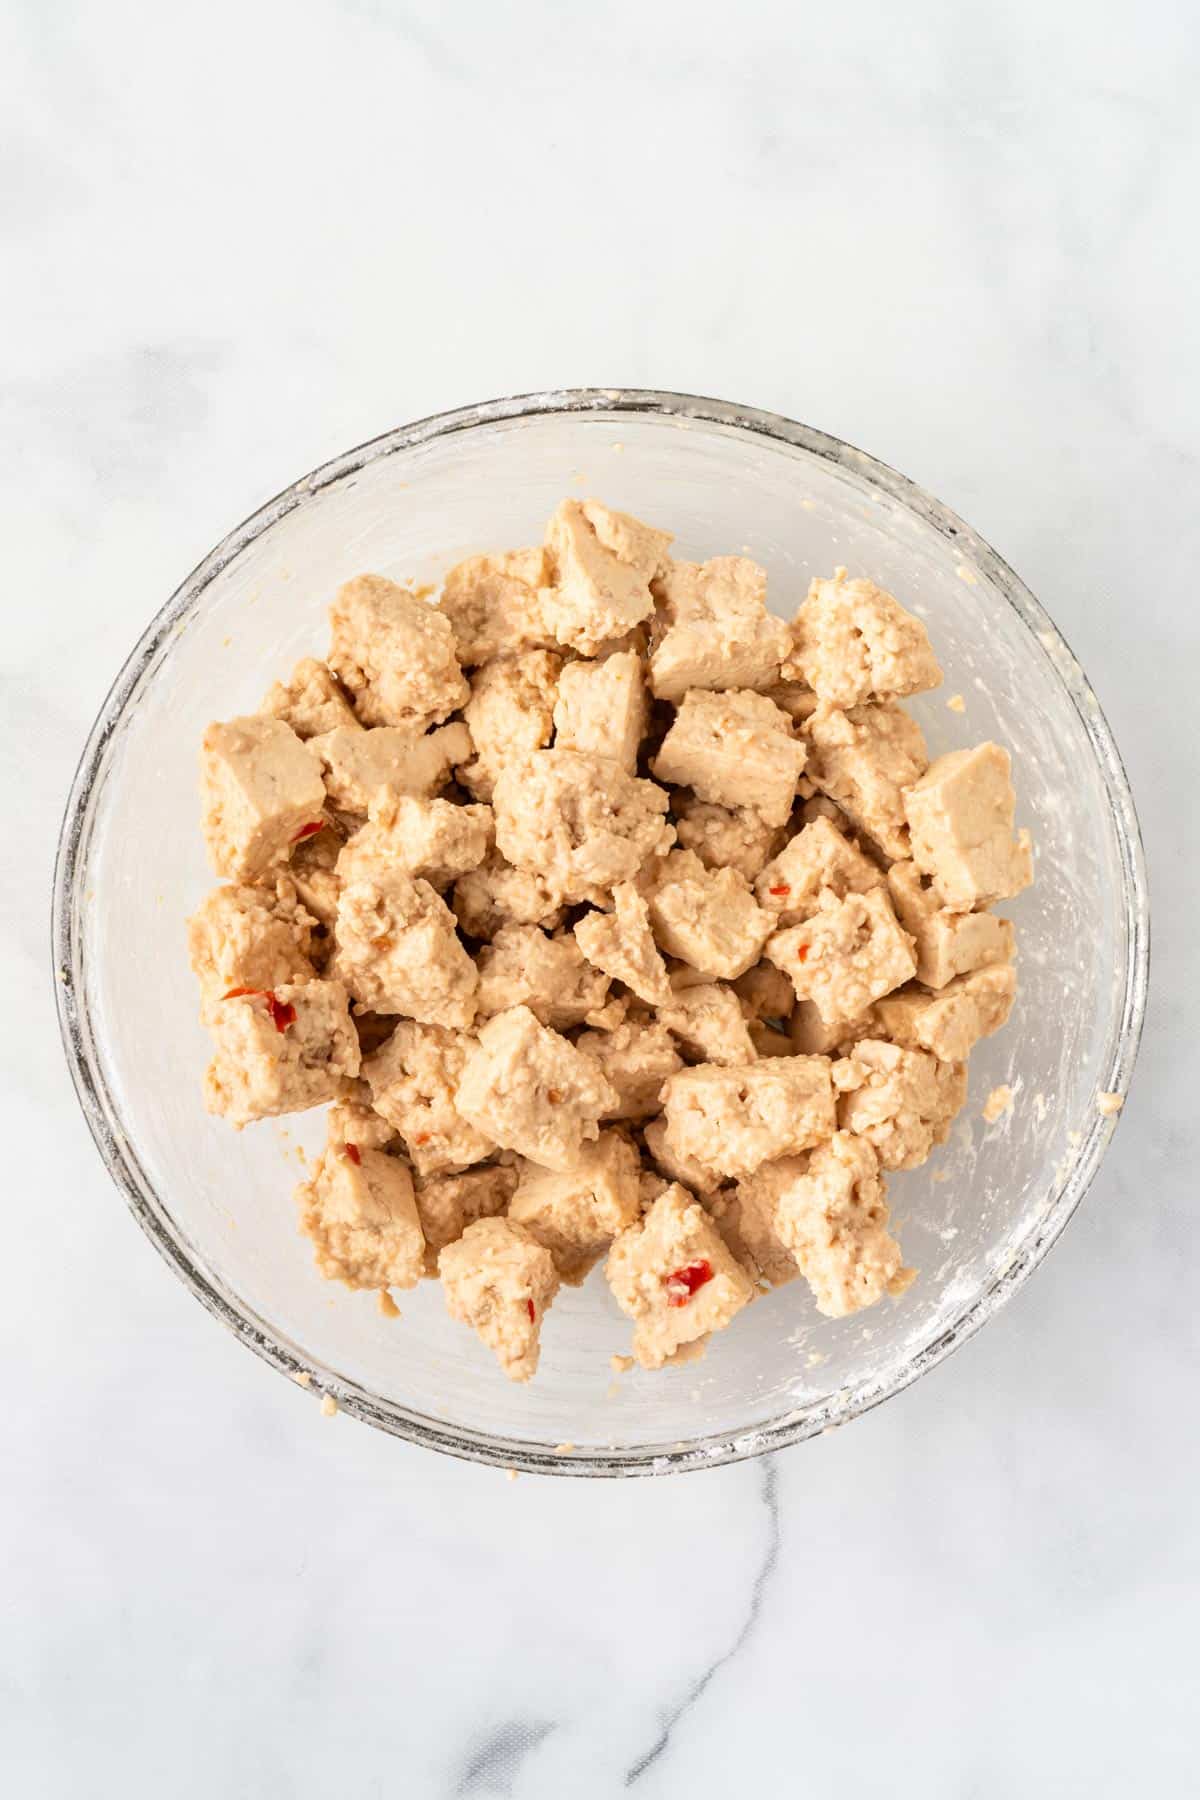 A picture of torn tofu coated in flour in a clear bowl.